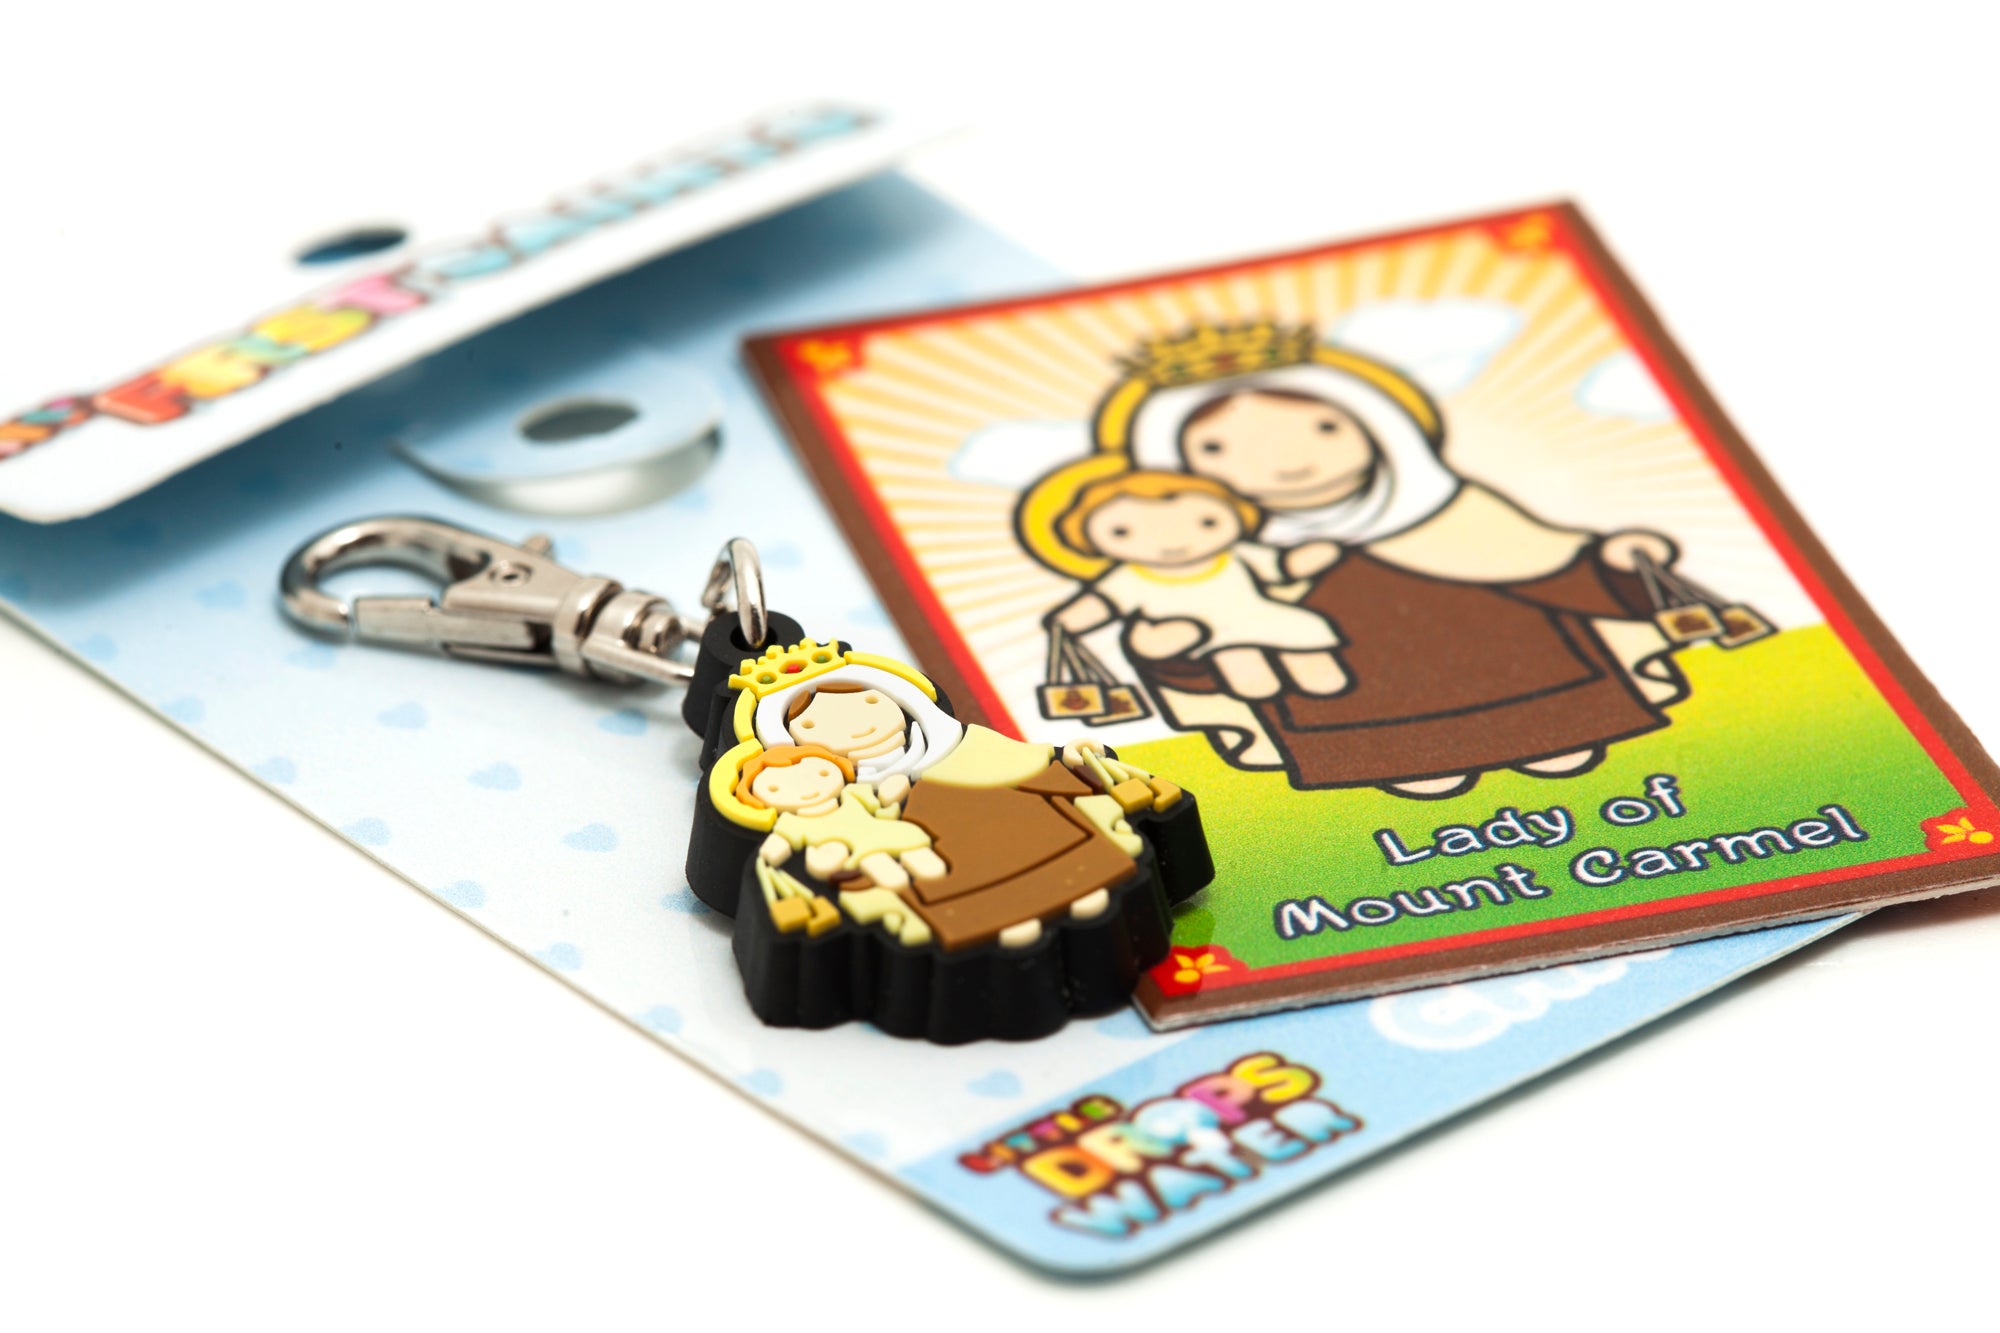 Our Lady of Mount Carmel charm